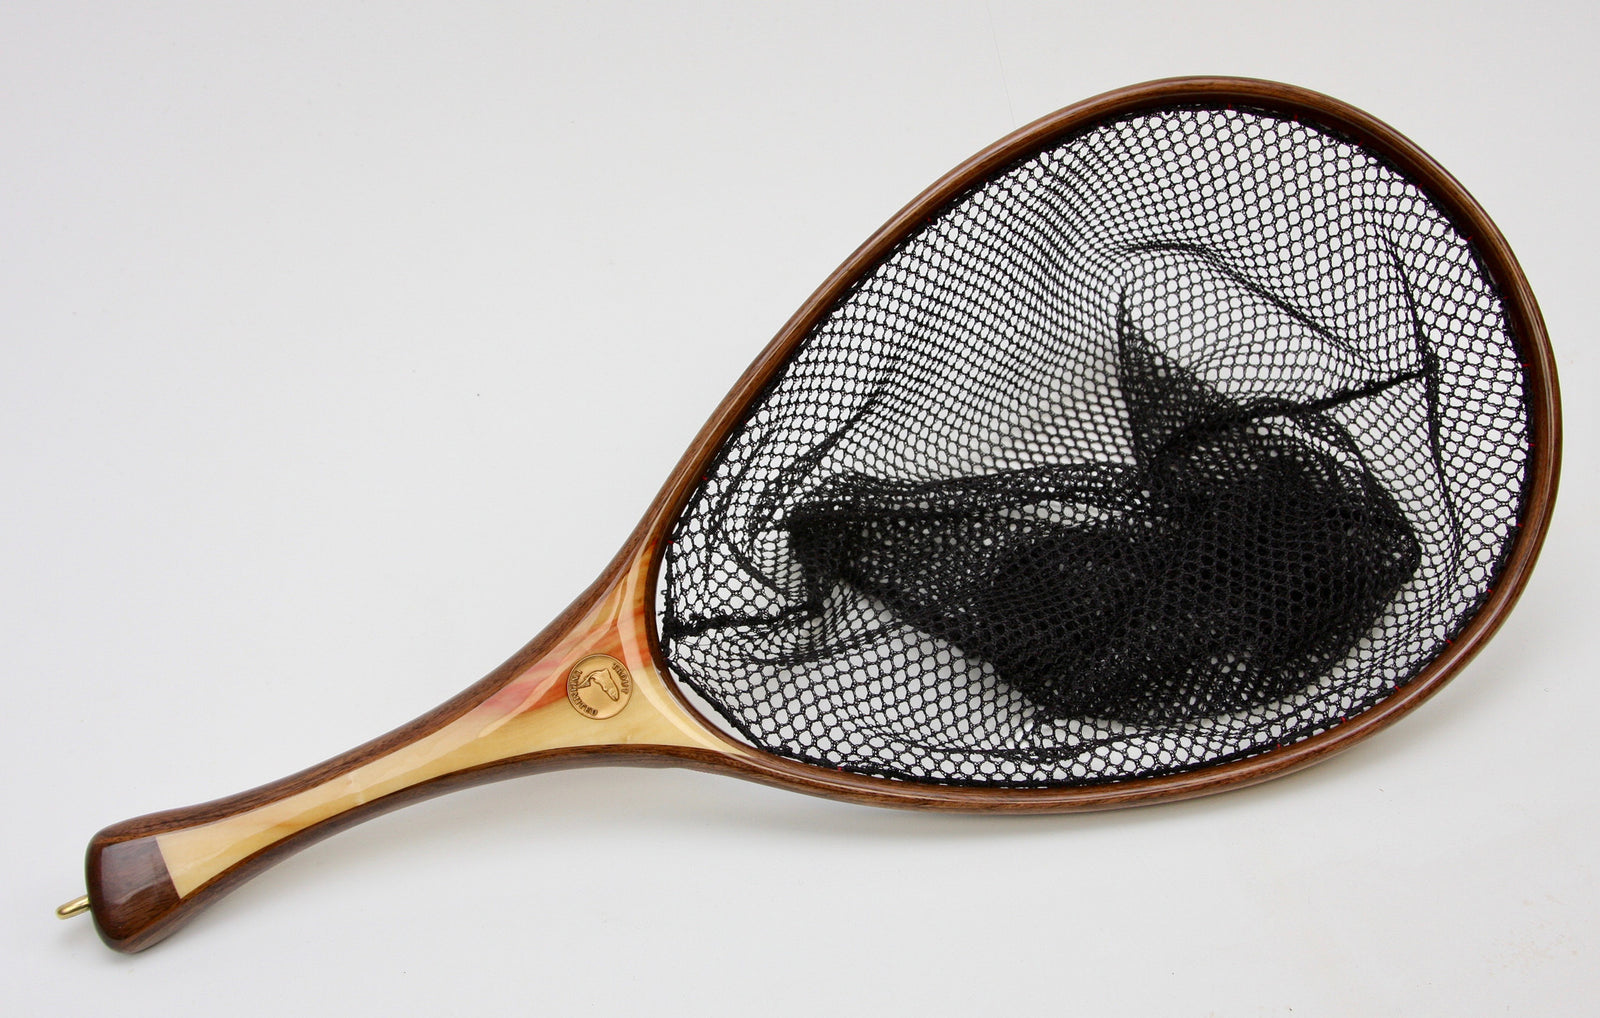 Medium Traditional Landing Nets - Good for Trout Fishing - Nets